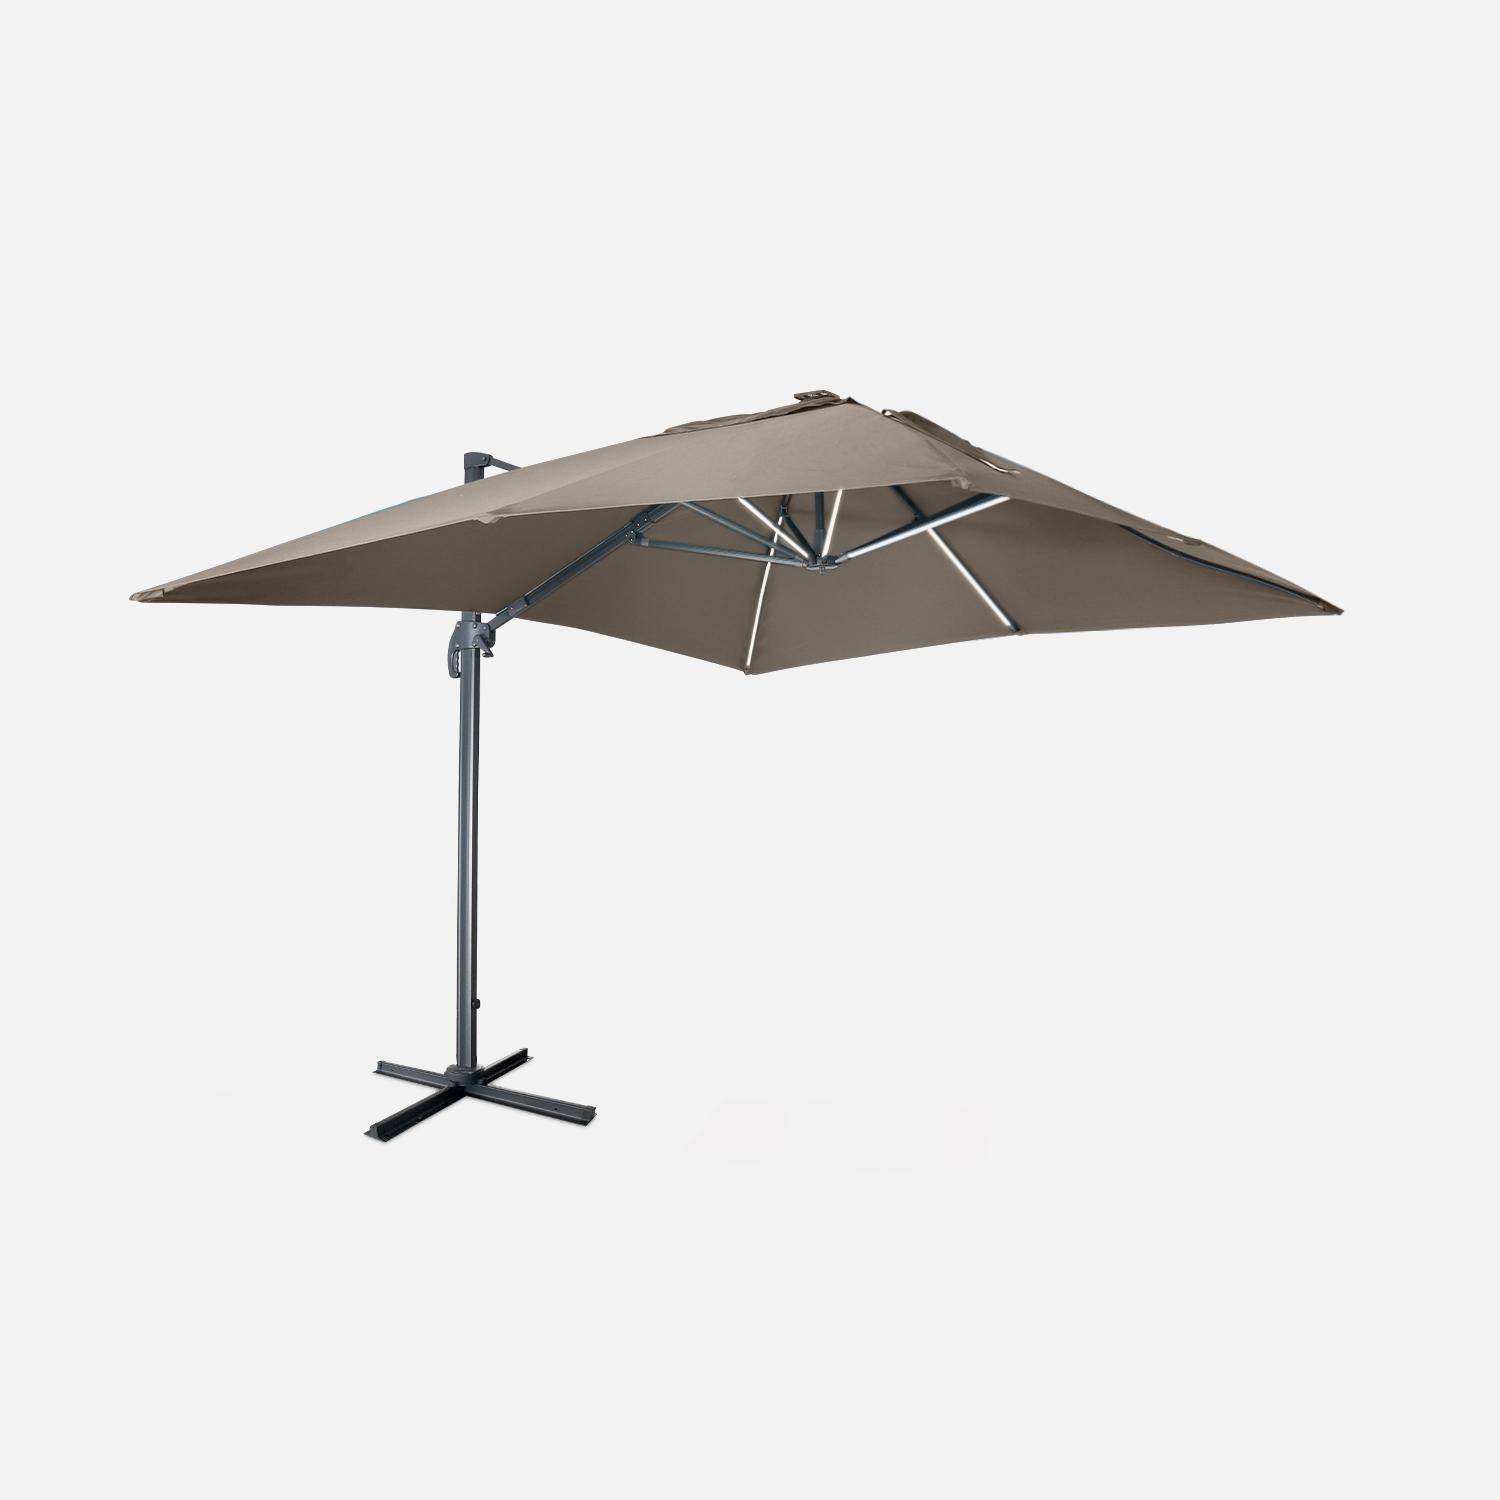 Premium quality rectangular 3x4m cantilever parasol with solar-powered integrated LED lights, tiltable, foldable , 360° rotation, cover included, beige,sweeek,Photo1